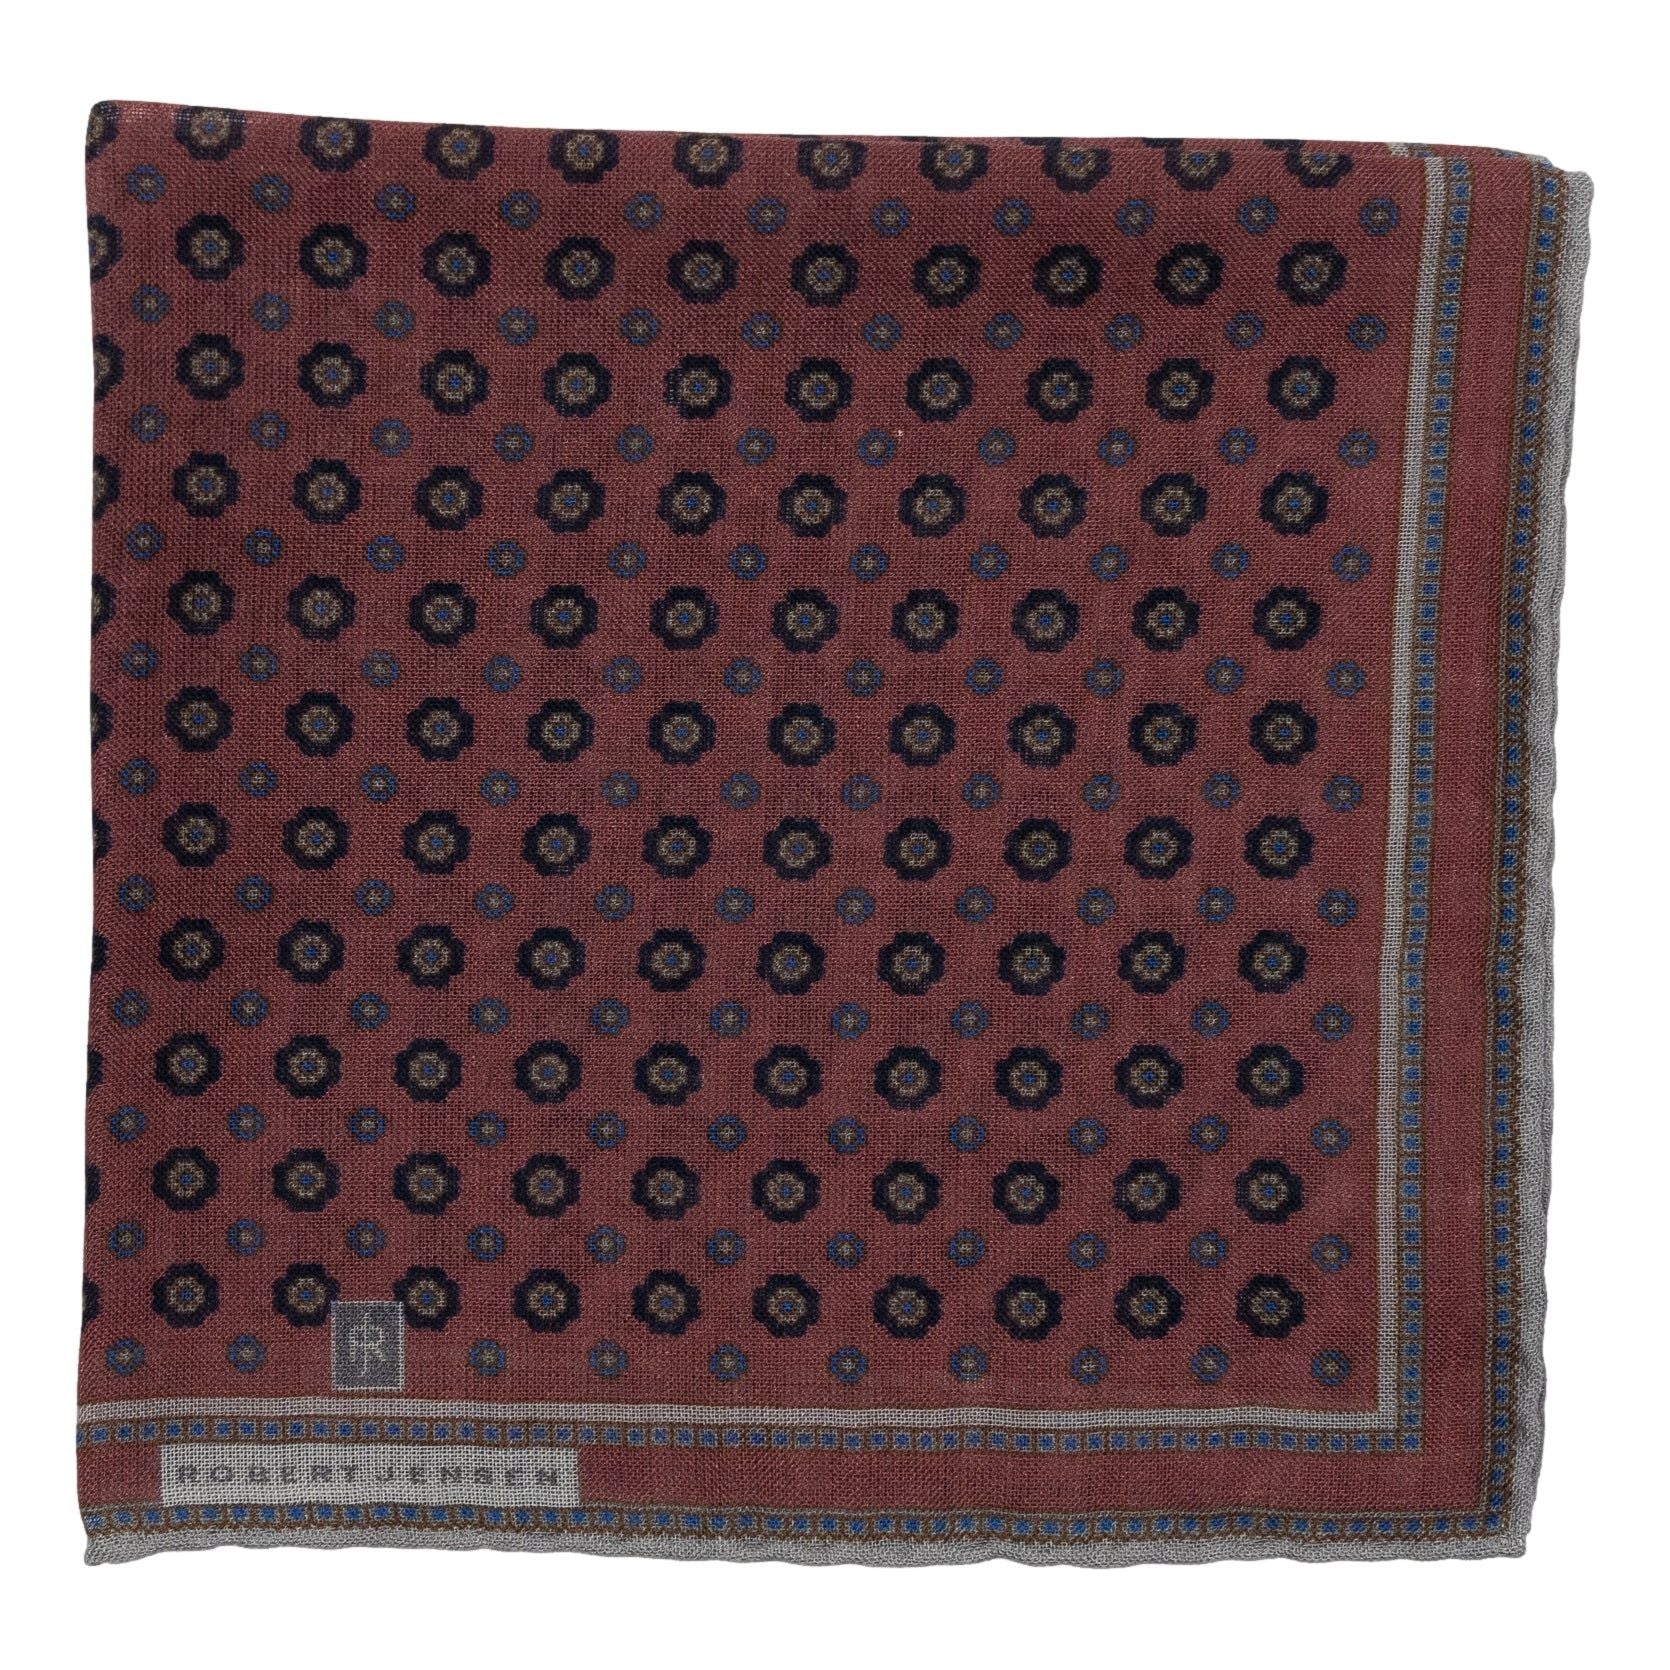 Cagliari Flower Wool and Silk Pocket Square